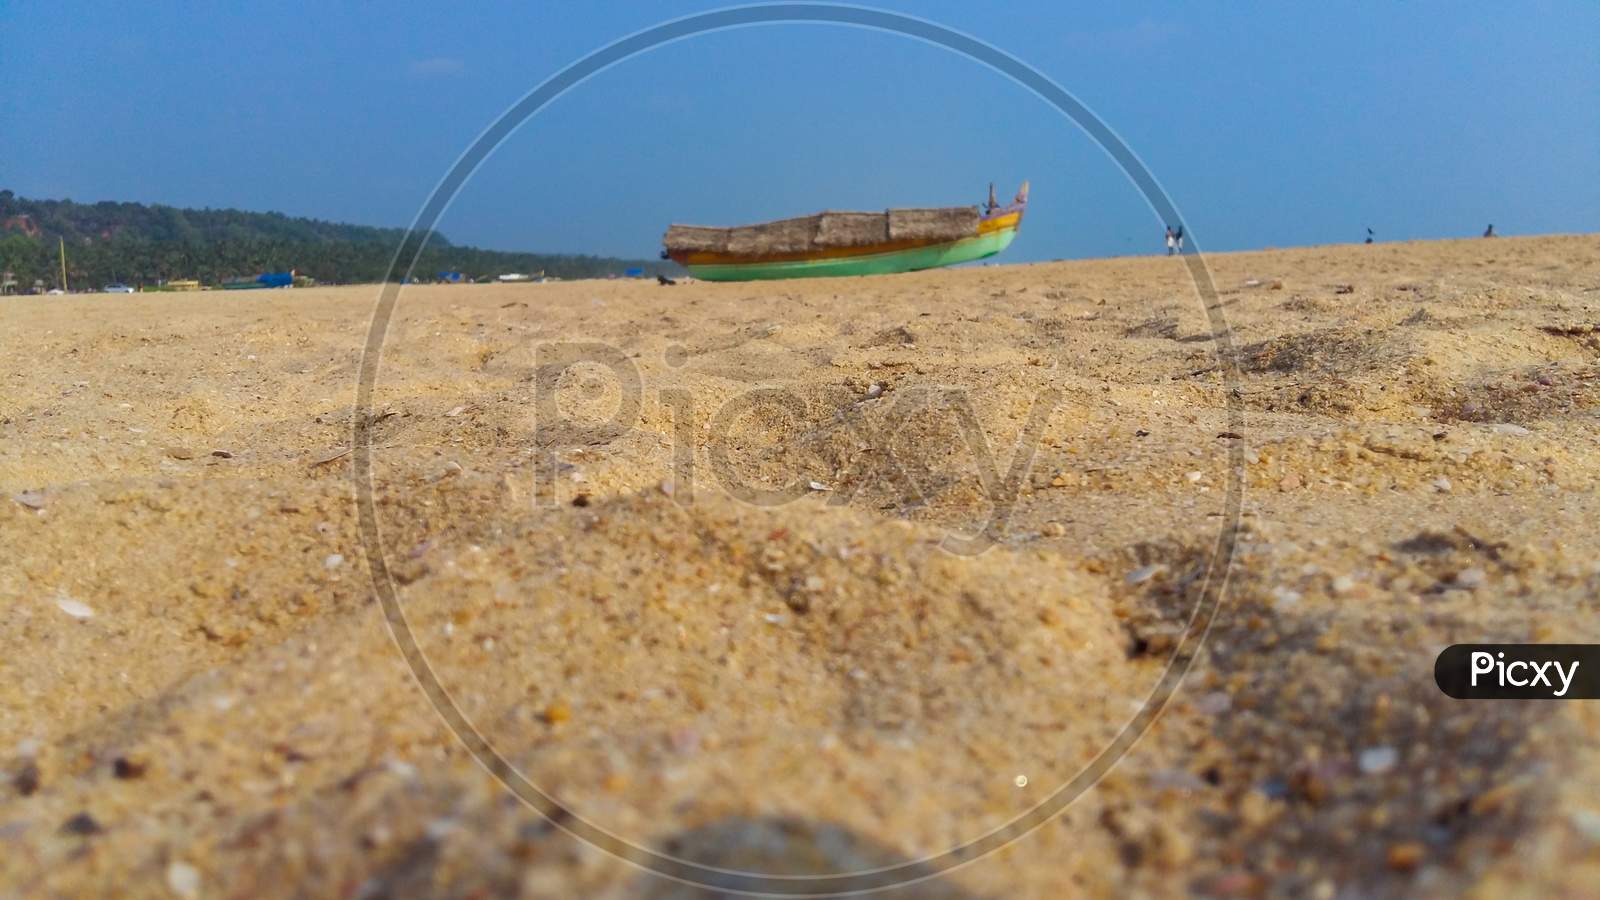 Landscape Image Of Sandy Azhimala Beach In Trivandrum, Kerala, India With A Unfocused Parked Fishing Boat On Sand.